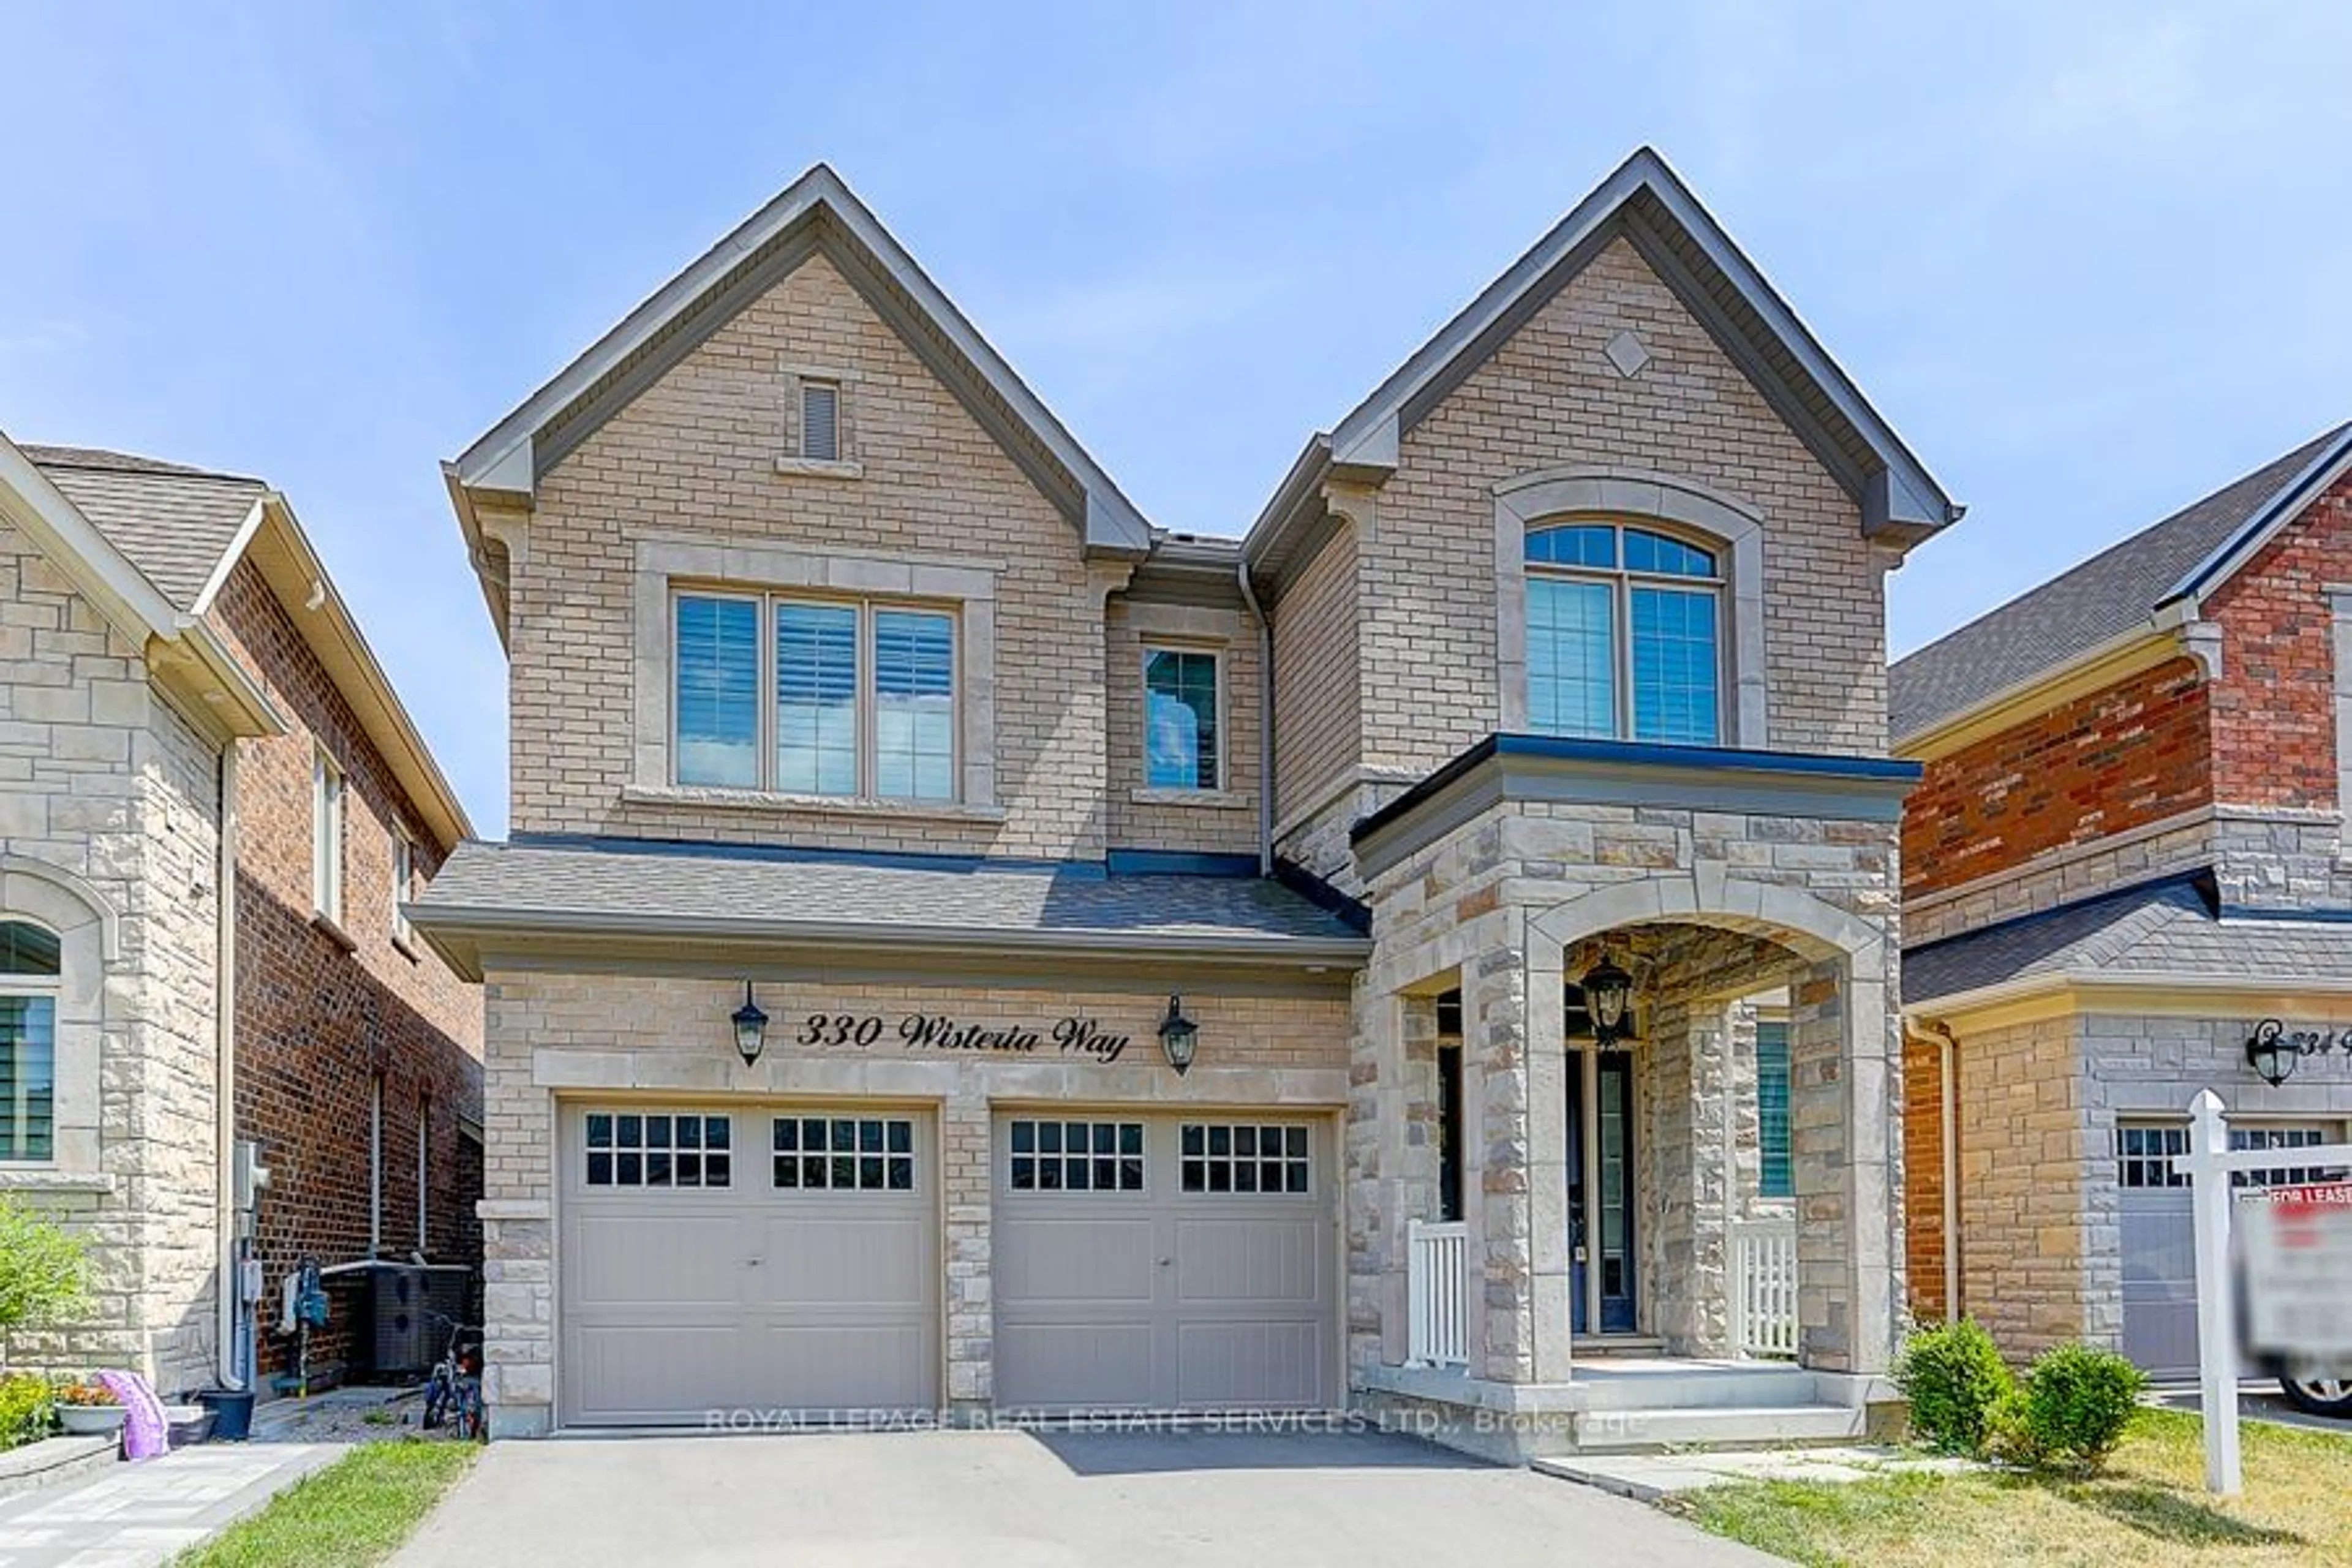 Home with brick exterior material for 330 Wisteria Way, Oakville Ontario L6M 1L6